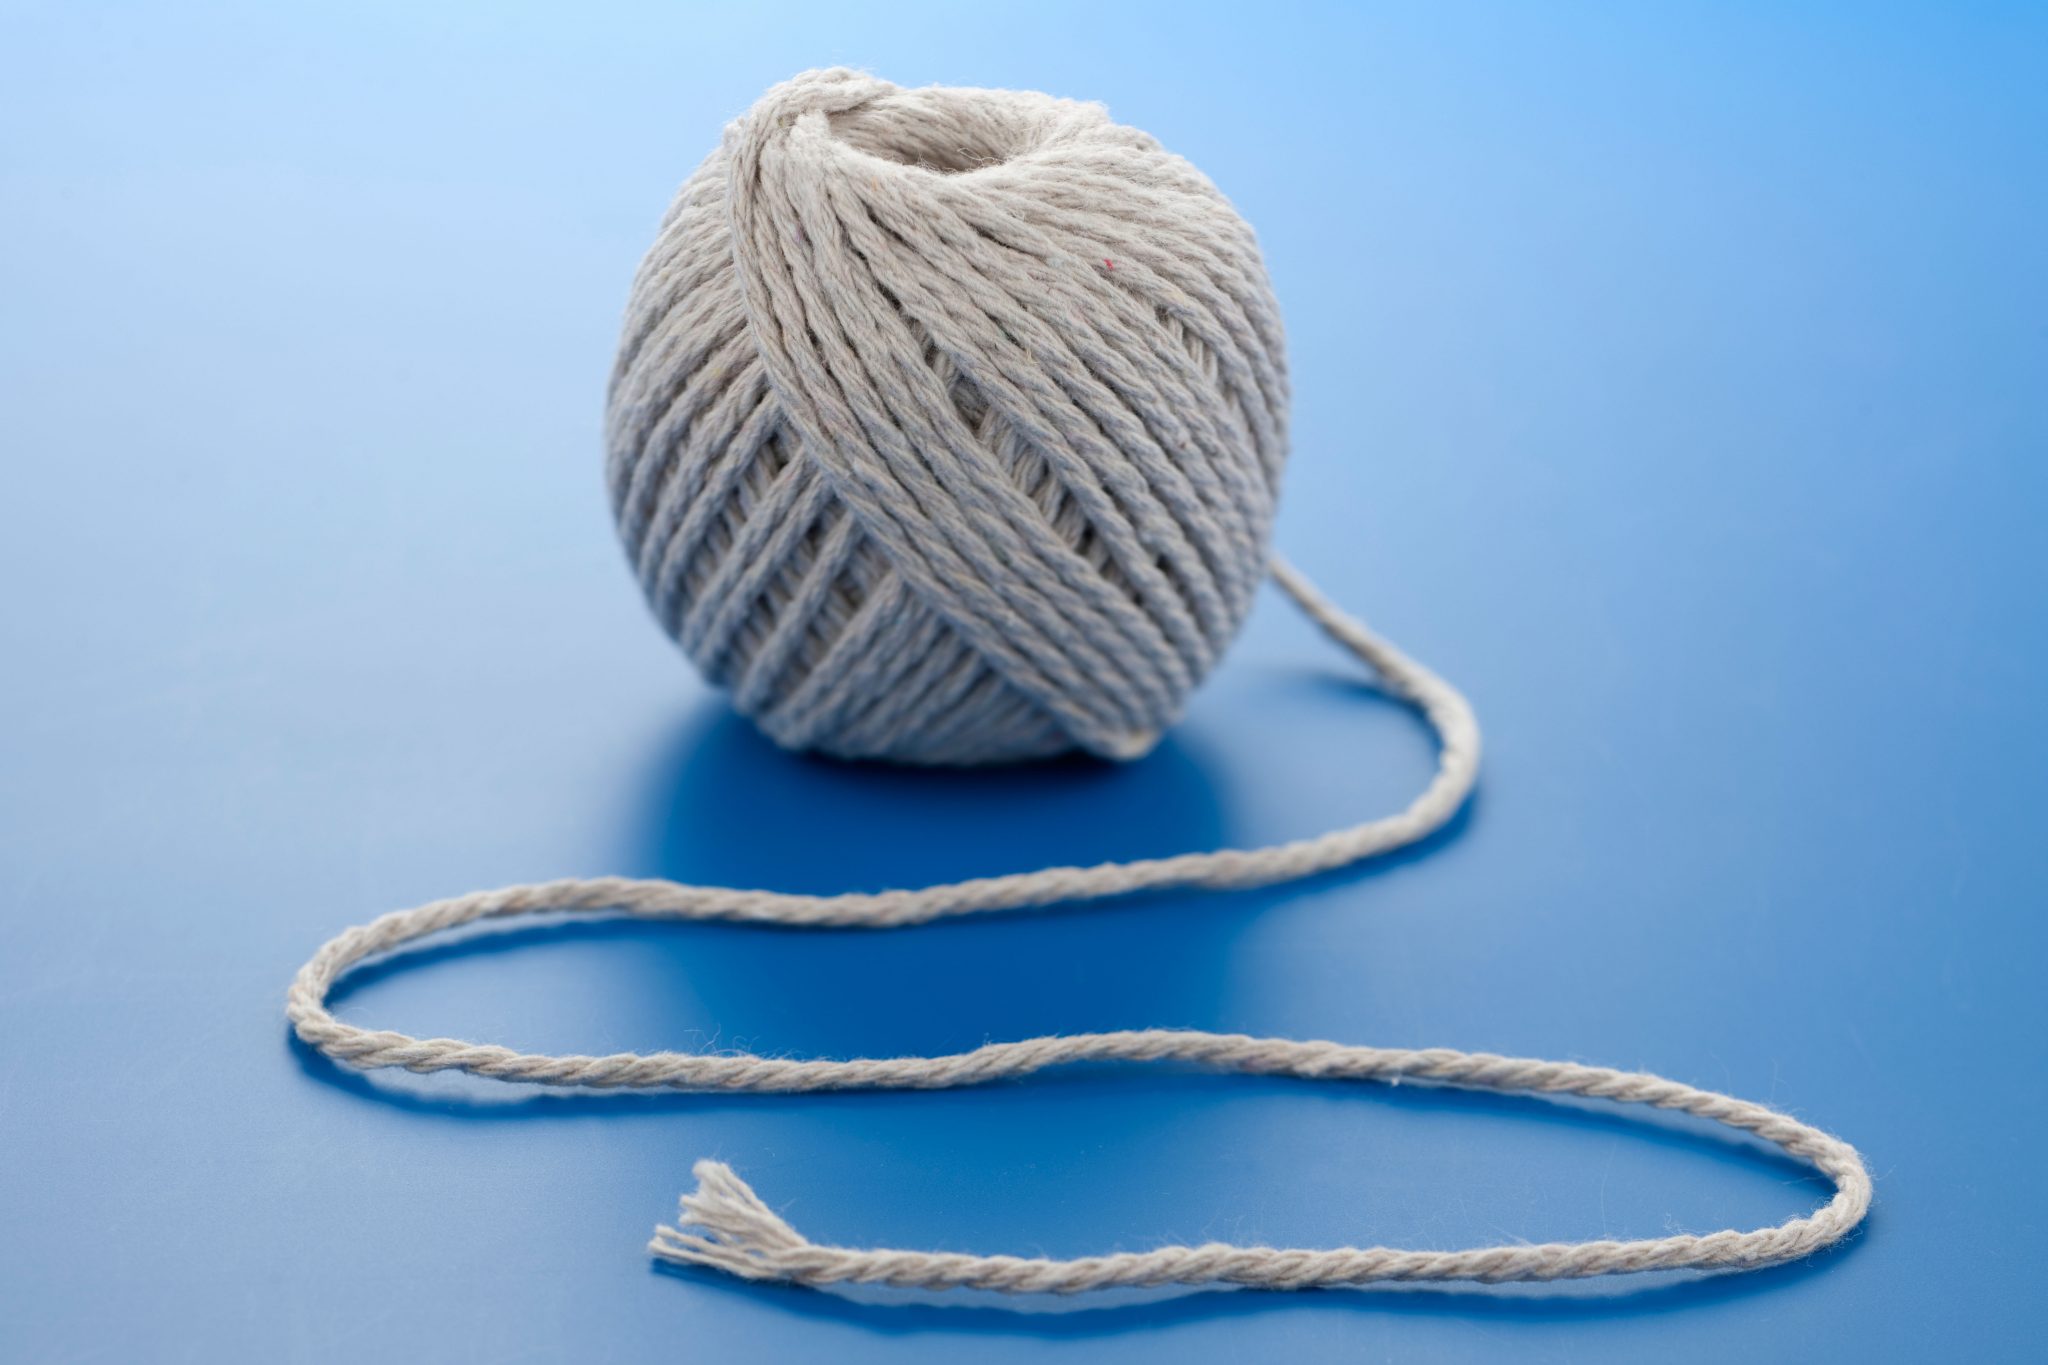 How Long is a Piece of String? - The International Academic Forum